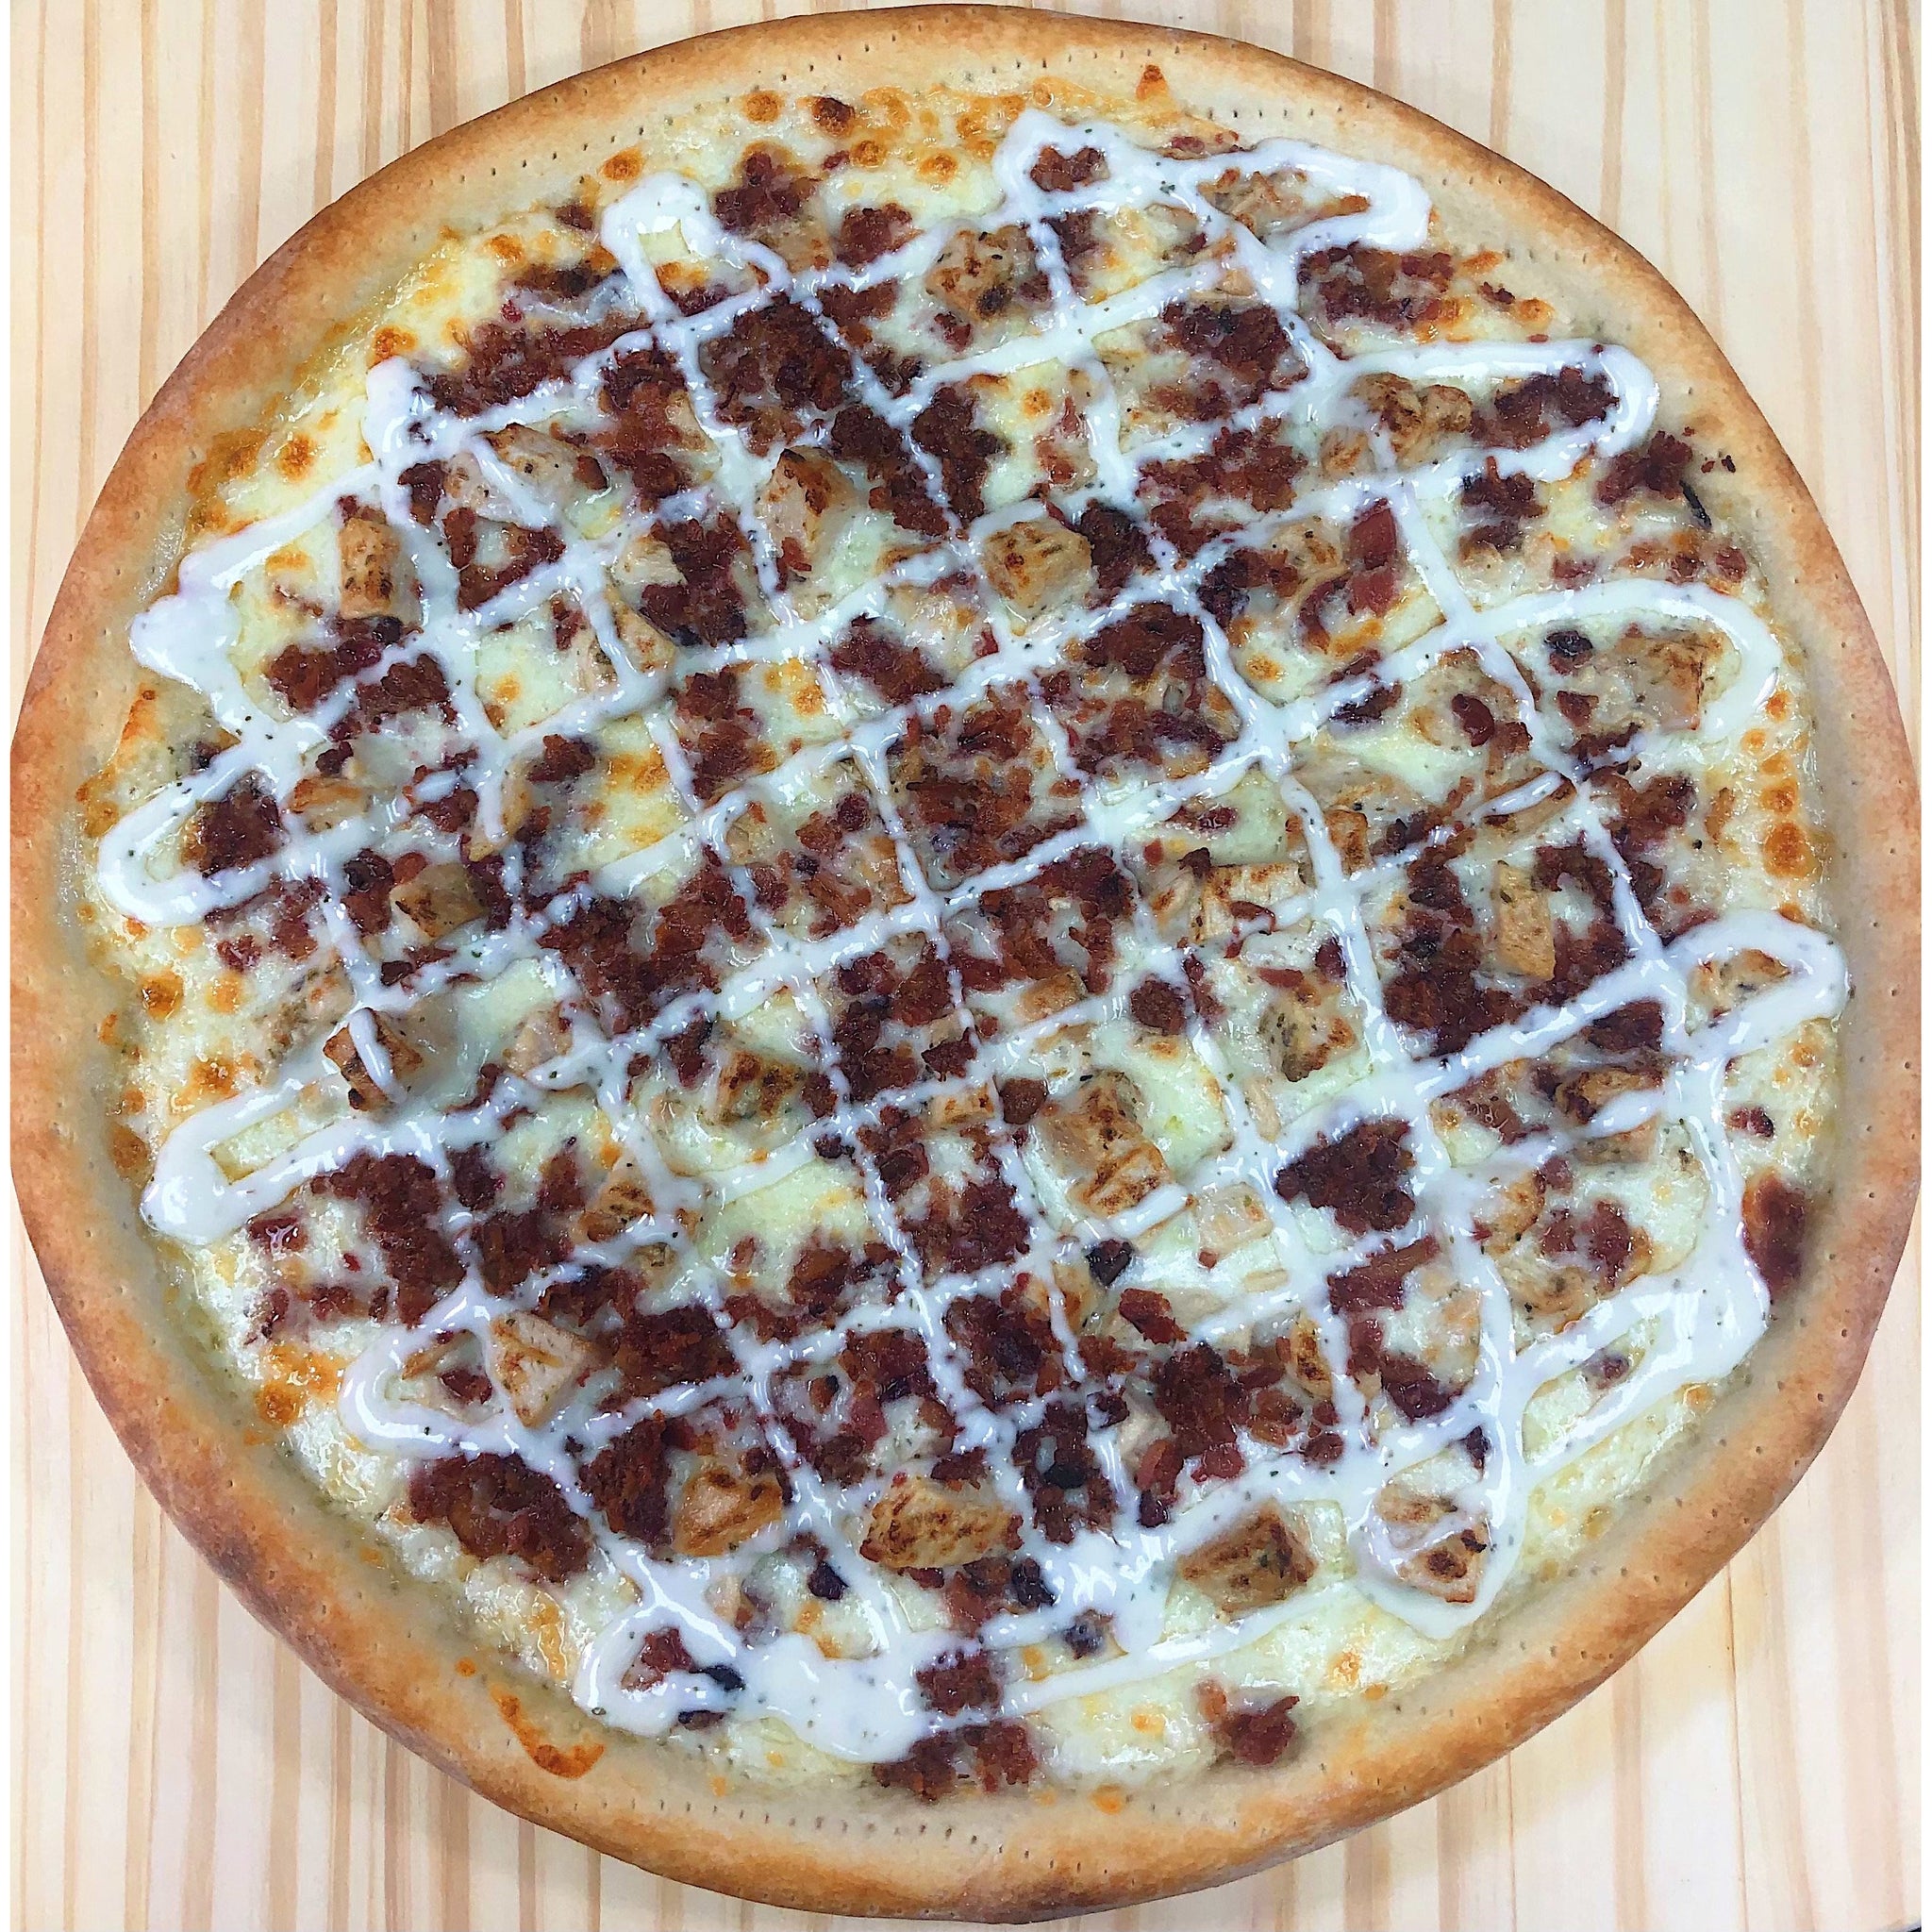 An image of a Chicken Bacon Ranch Pizza. The pizza has a thin and crispy crust topped with a creamy ranch sauce. It is generously layered with seasoned chicken pieces, crispy bacon strips, and melted cheese. The pizza is garnished with fresh chopped tomatoes and a sprinkle of herbs, presenting a delicious combination of flavors. It is a visually appealing and appetizing pizza.